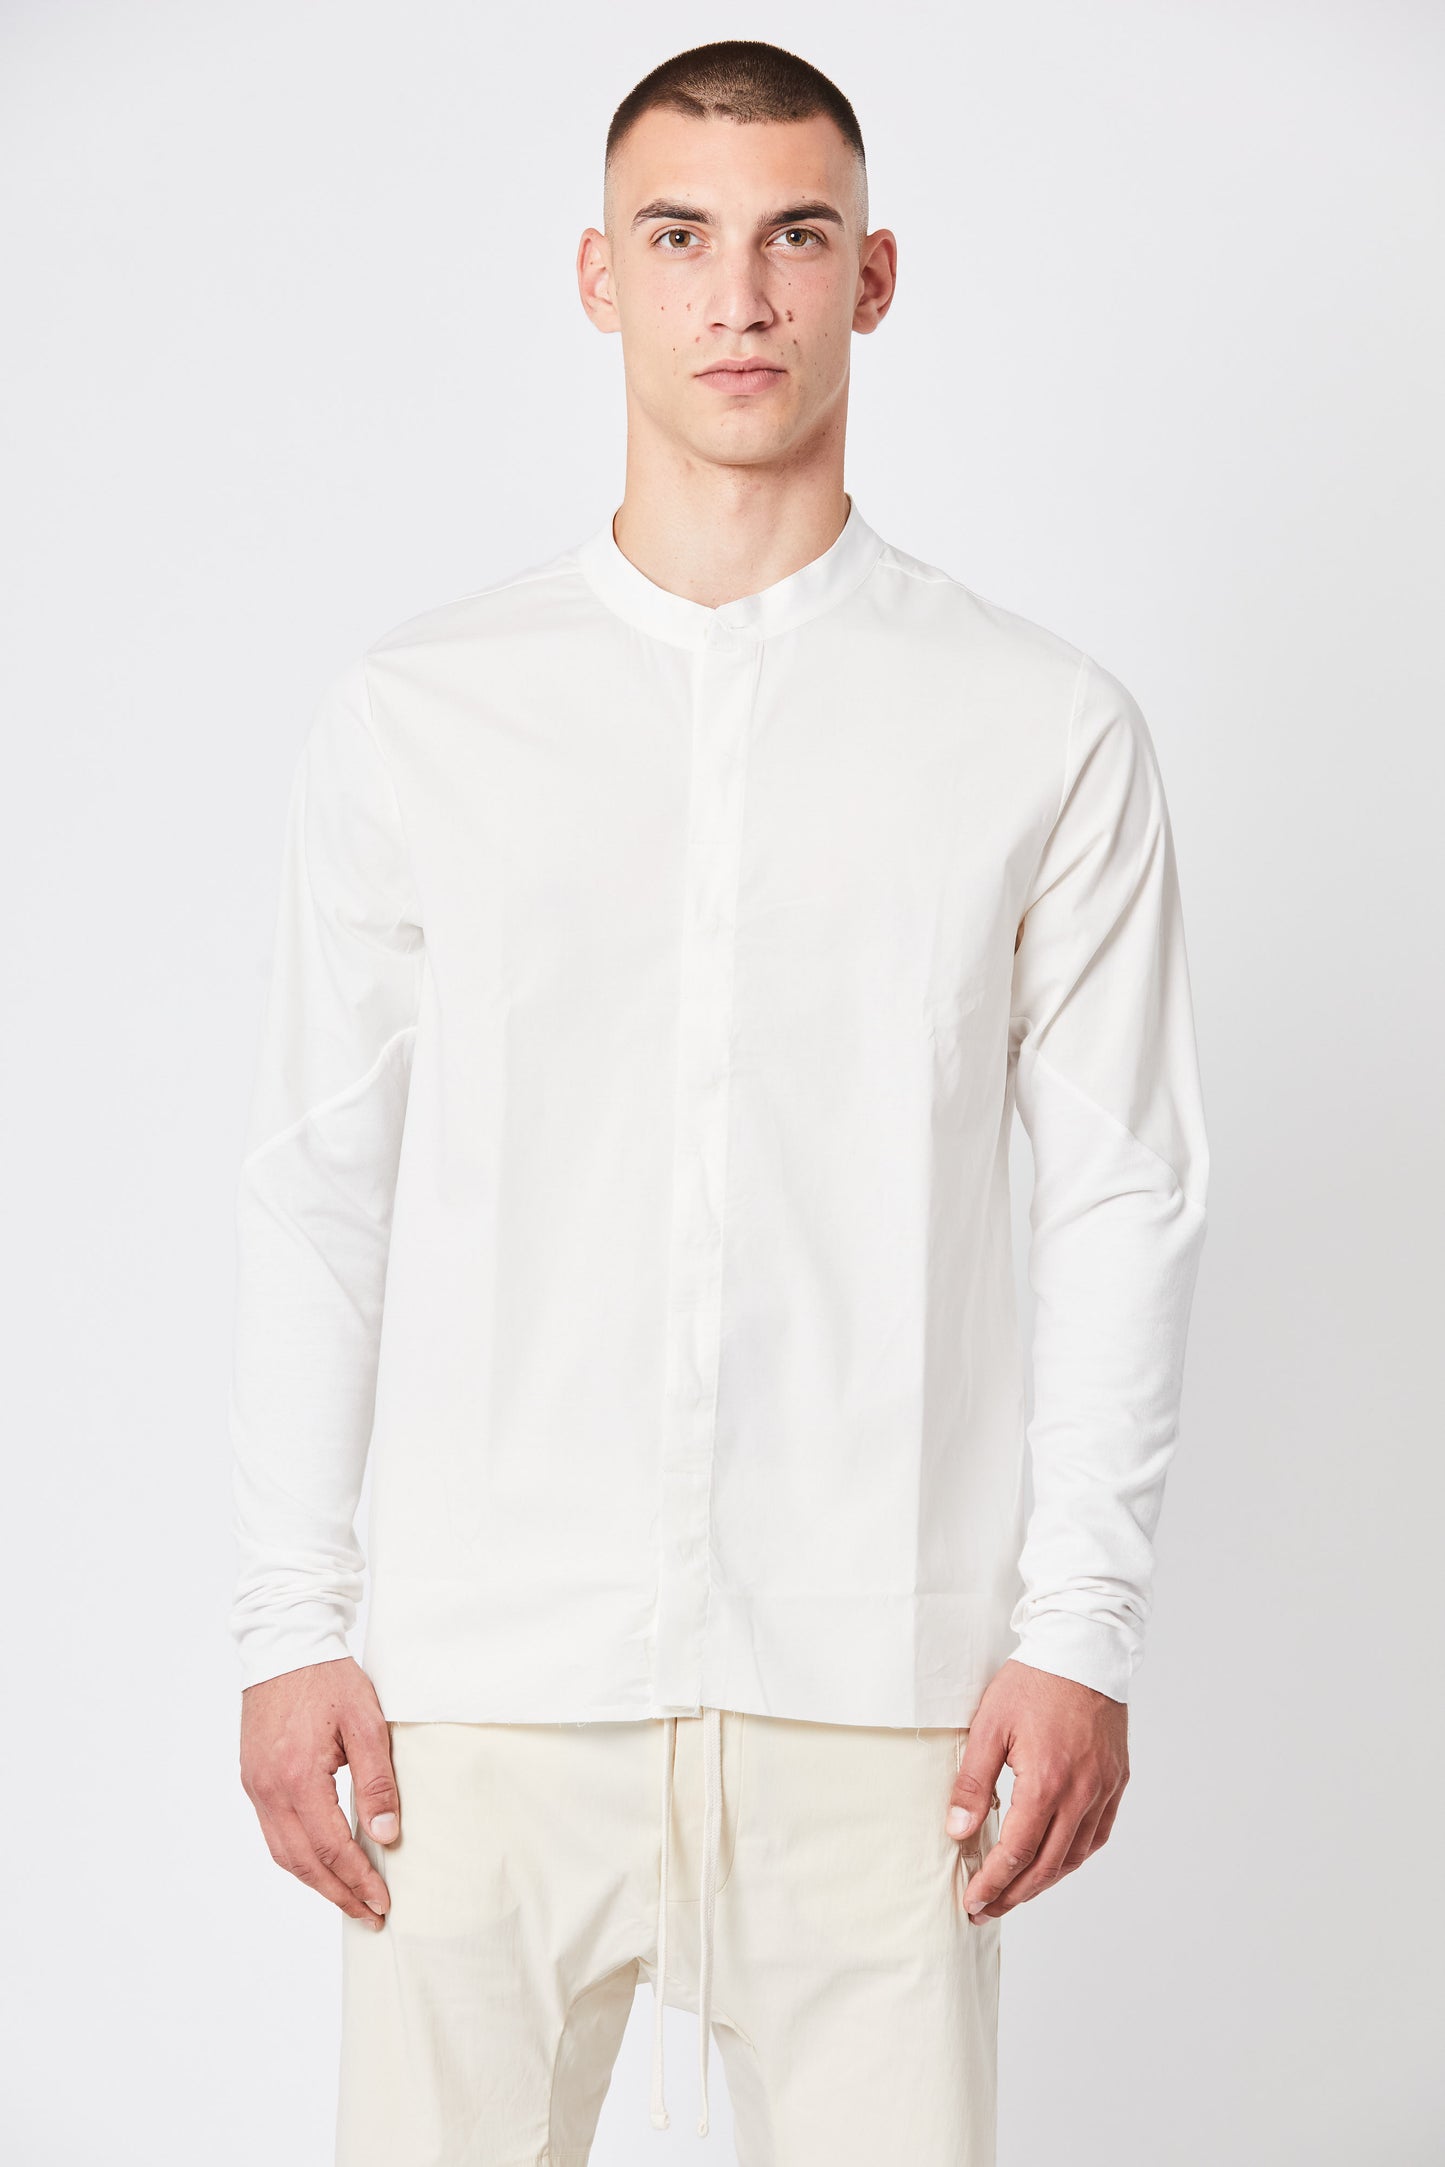 Off White Collarless Long Sleeve Cotton Shirt MH 135